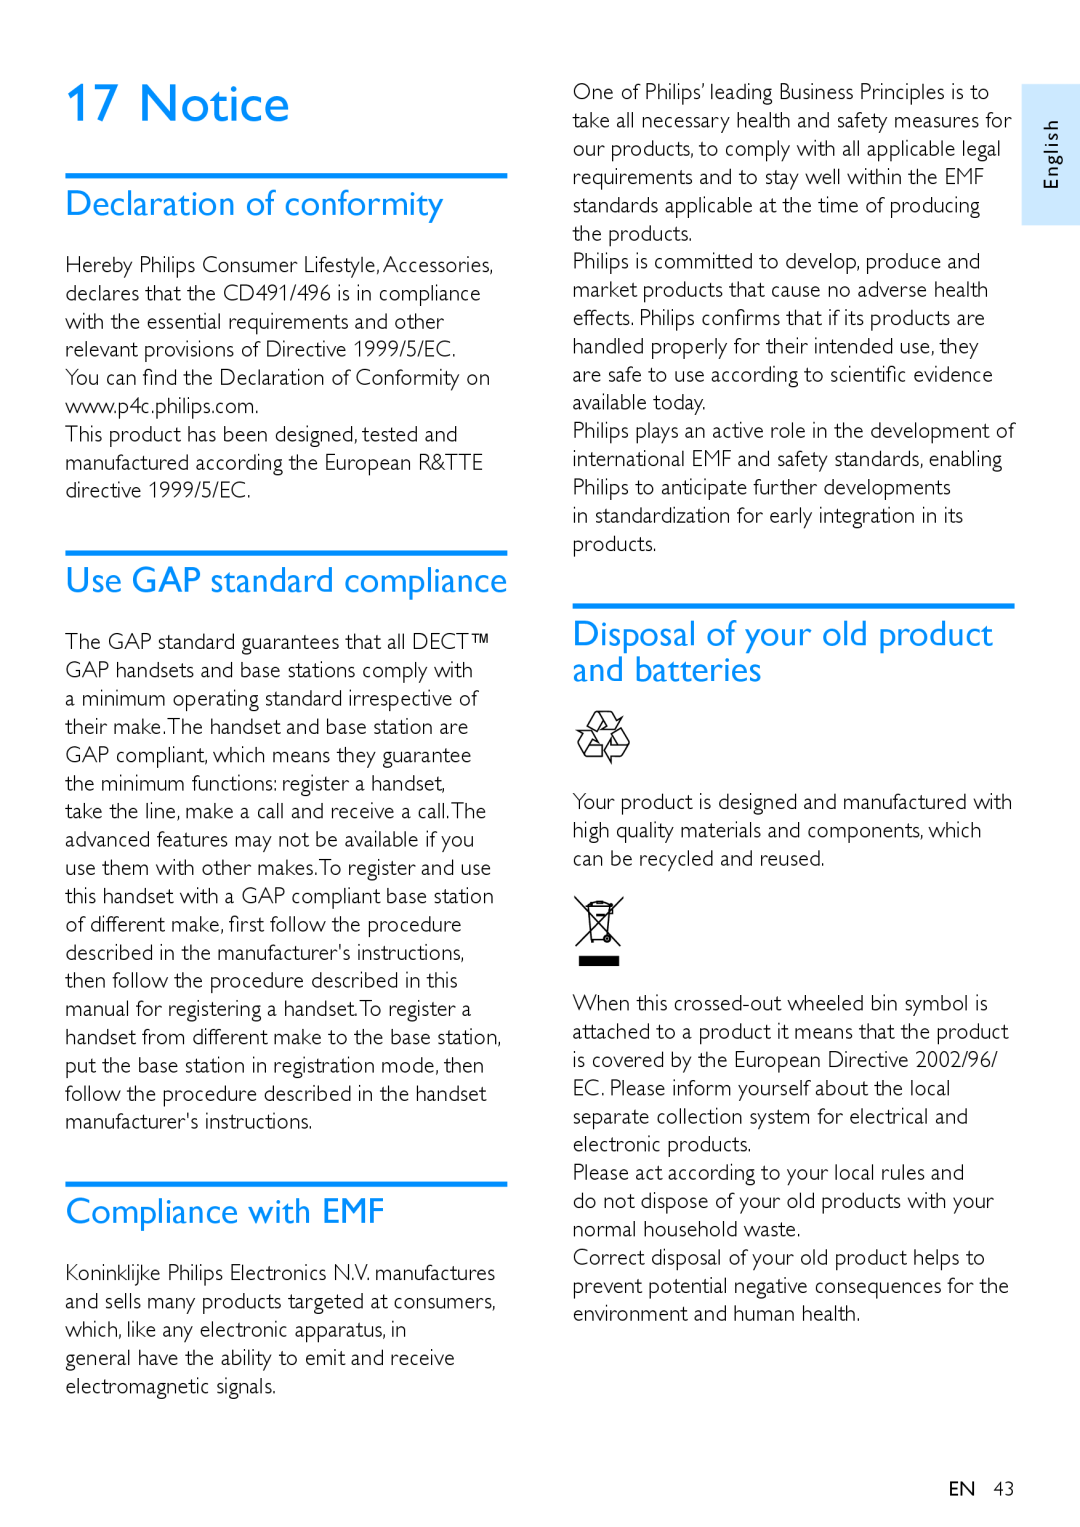 Philips CD491, CD496 user manual Notice, Declaration of conformity, Use GAP standard compliance, Compliance with EMF 